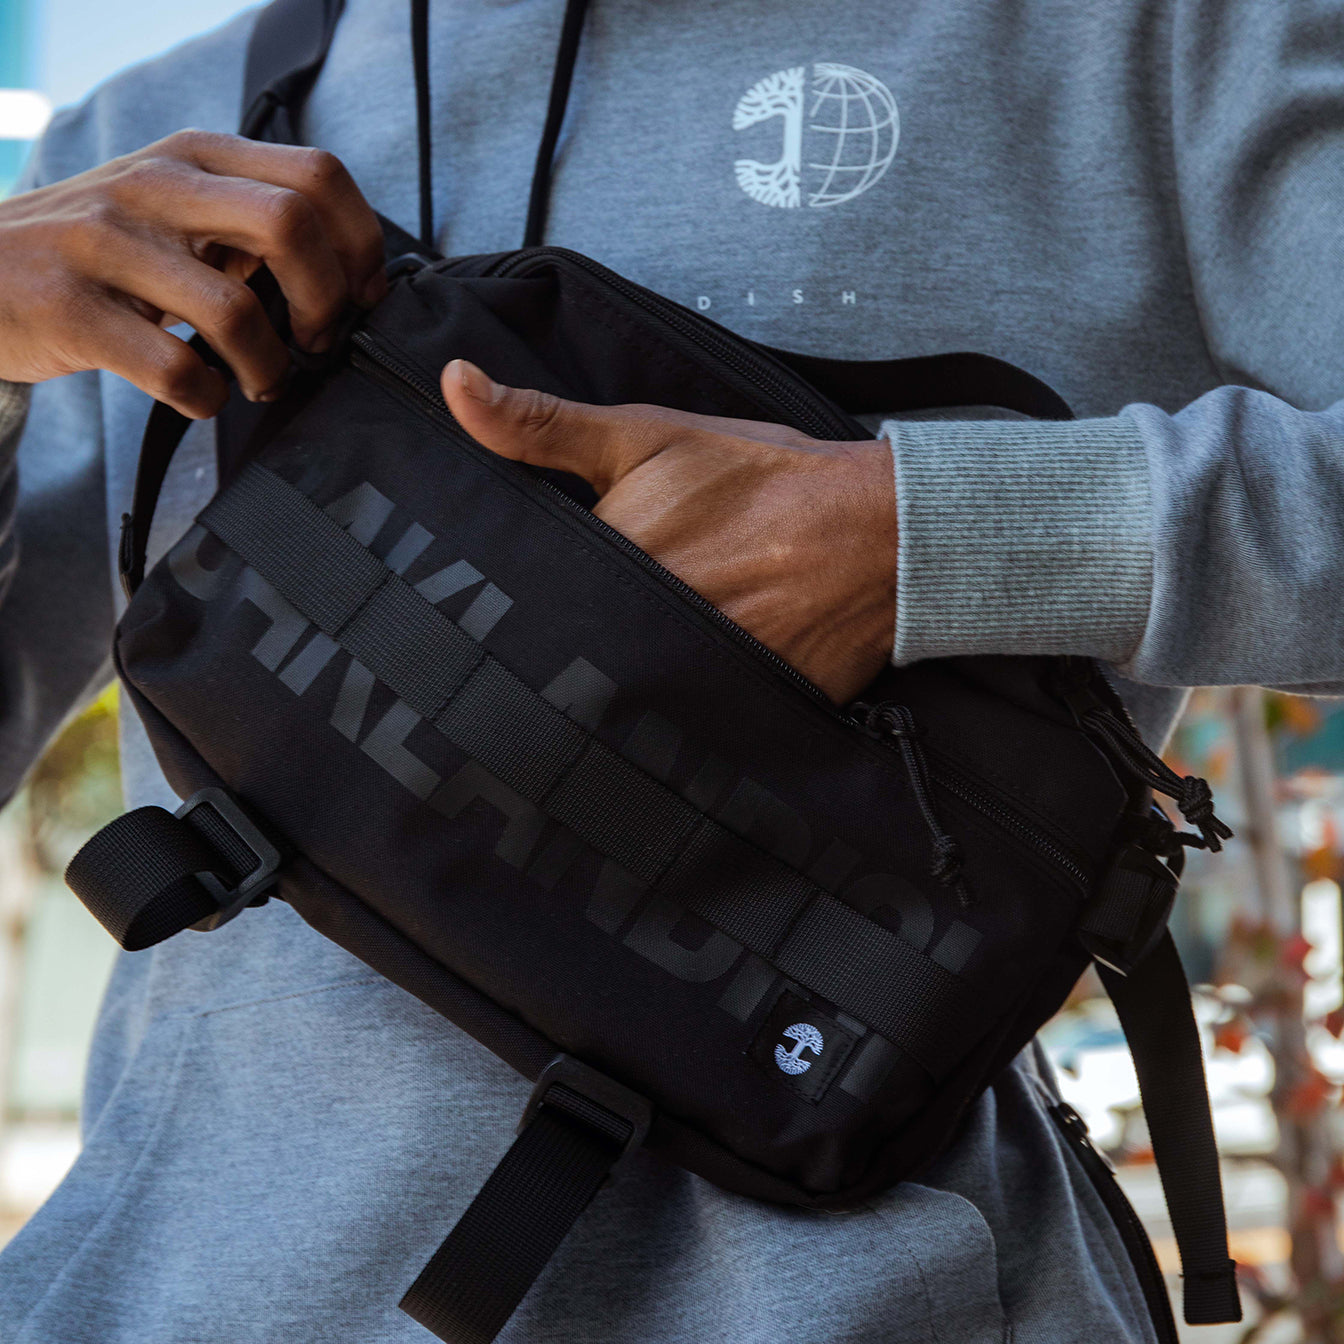 Close-up of the a man’s chest with his hand in a cross body black nylon hip bag with a Oaklandish wordmark and tree logo.